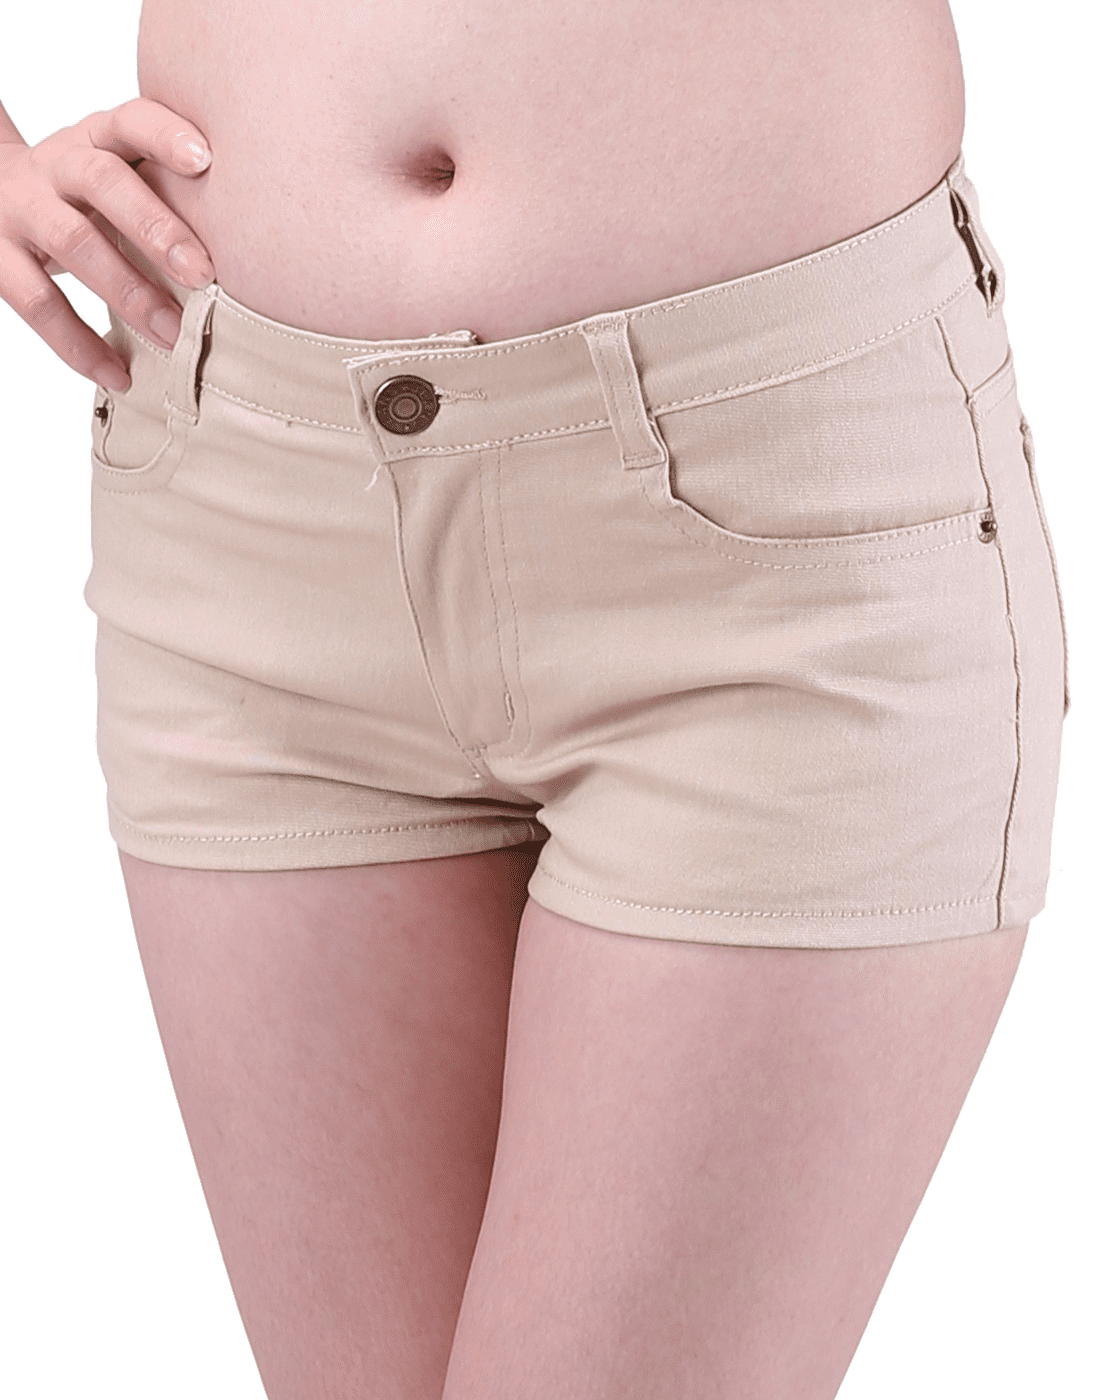 HDE Women's Solid Color Ultra Stretch Fitted Low Rise Moleton Denim Booty Shorts Khaki Medium - image 1 of 5